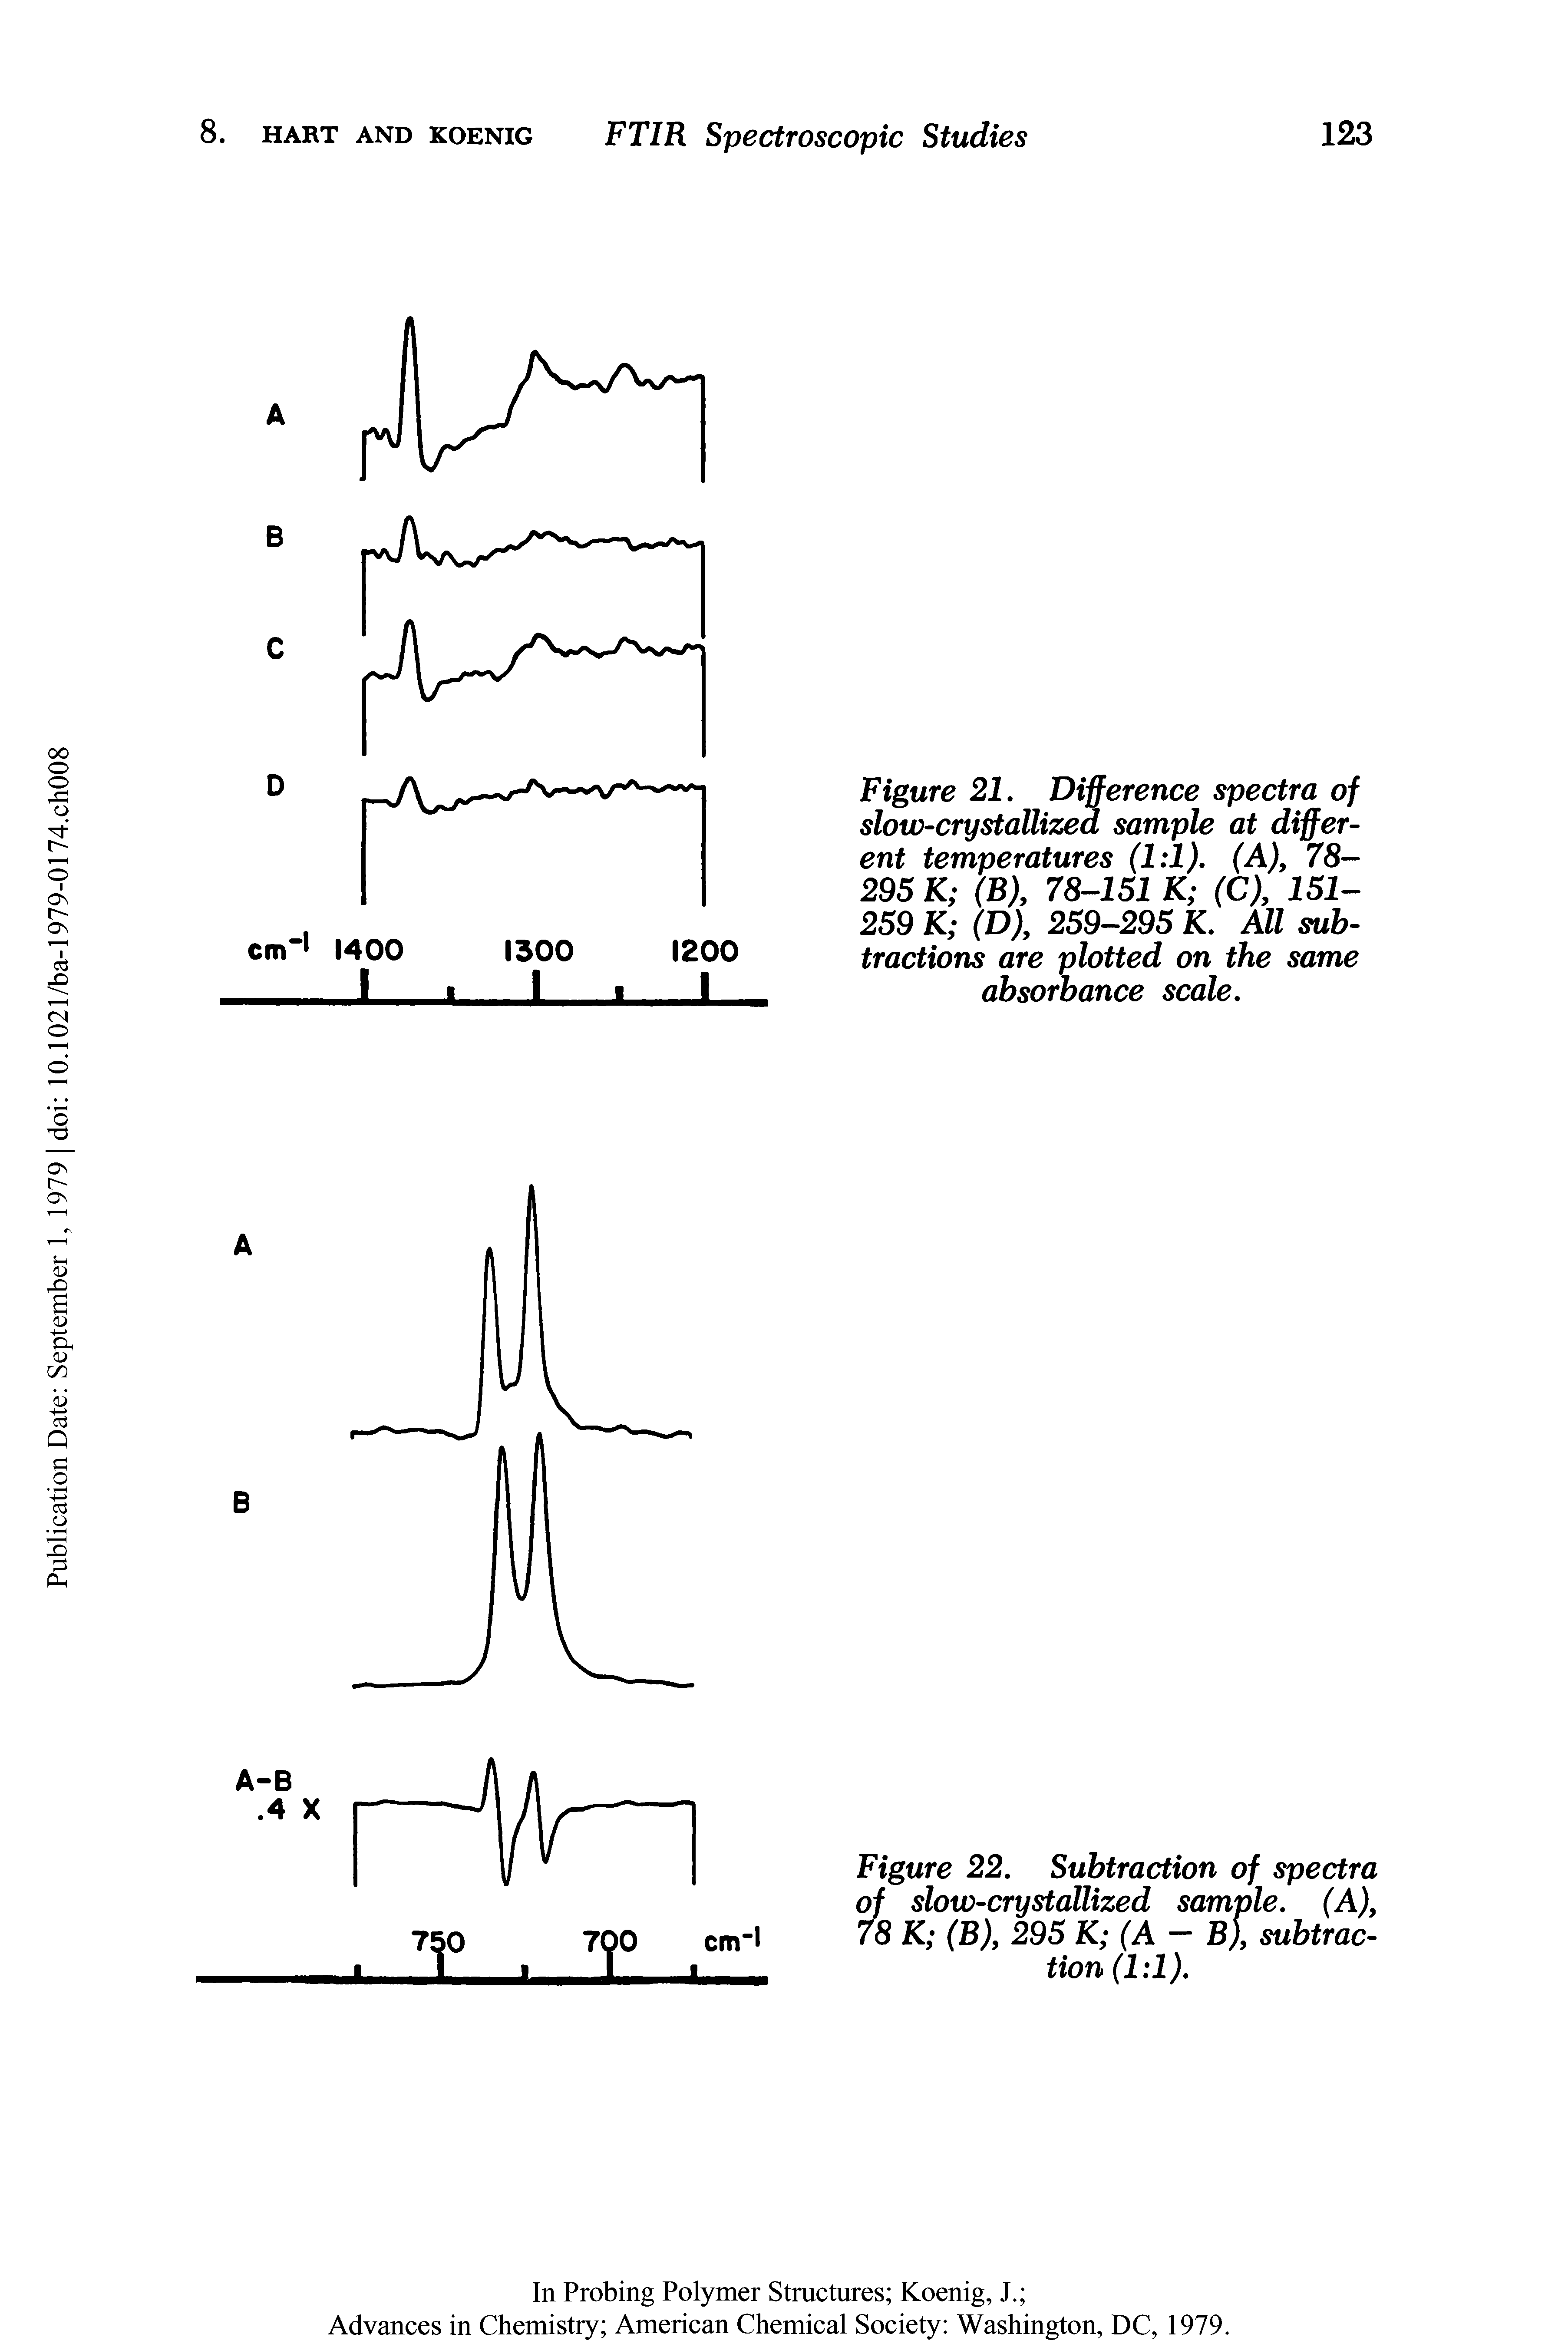 Figure 21, Difference spectra of slow-crystallized sample at different temperatures (1 1). (A), 78-295 K (B), 78-151 K (C), 151-259 K (D), 259-295 K. All subtractions are plotted on the same absorbance scale.